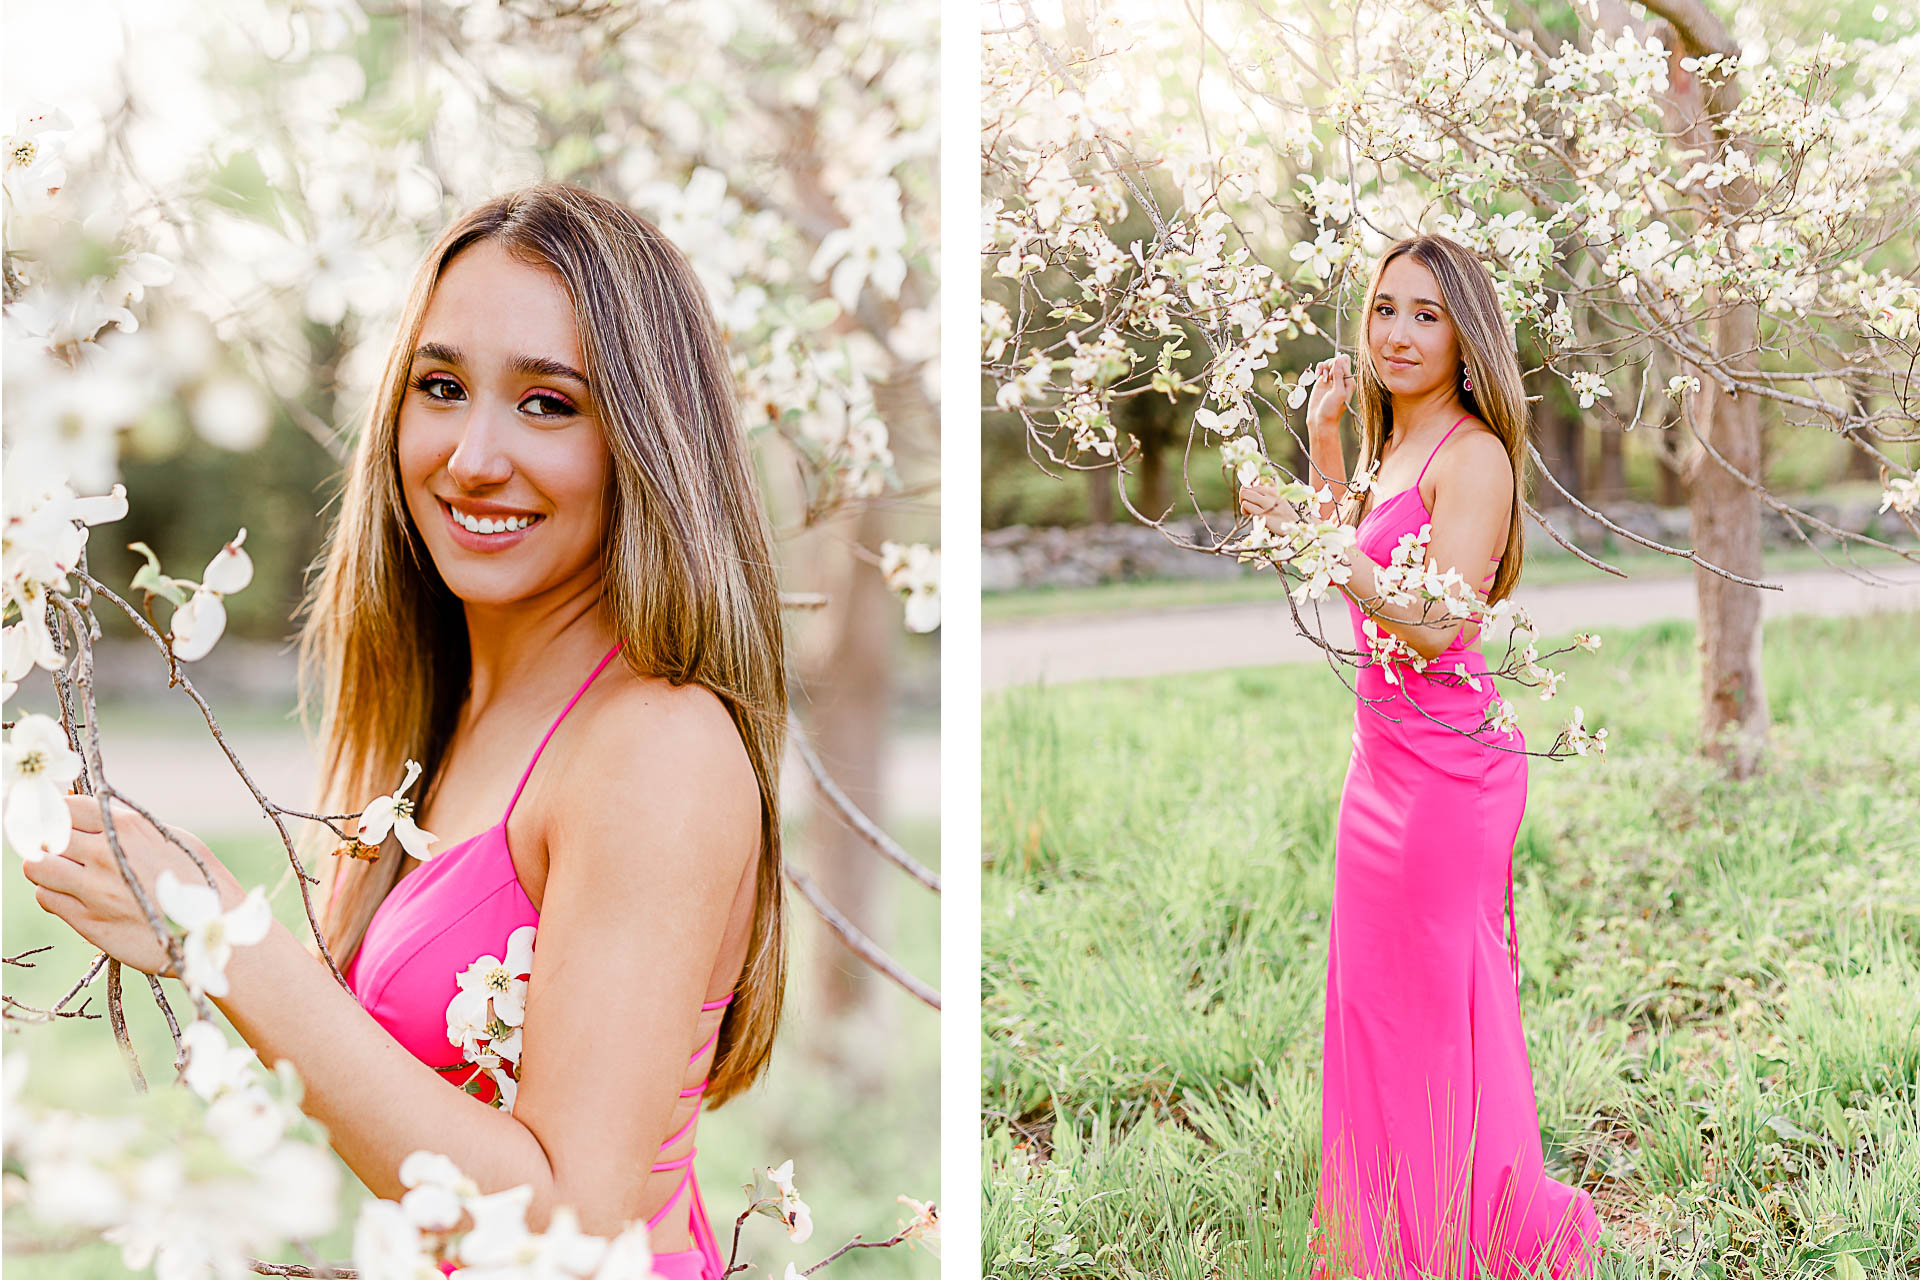 Photos by Hingham Senior Photographer Christina Runnals | Prom dress photos with flowers in the background